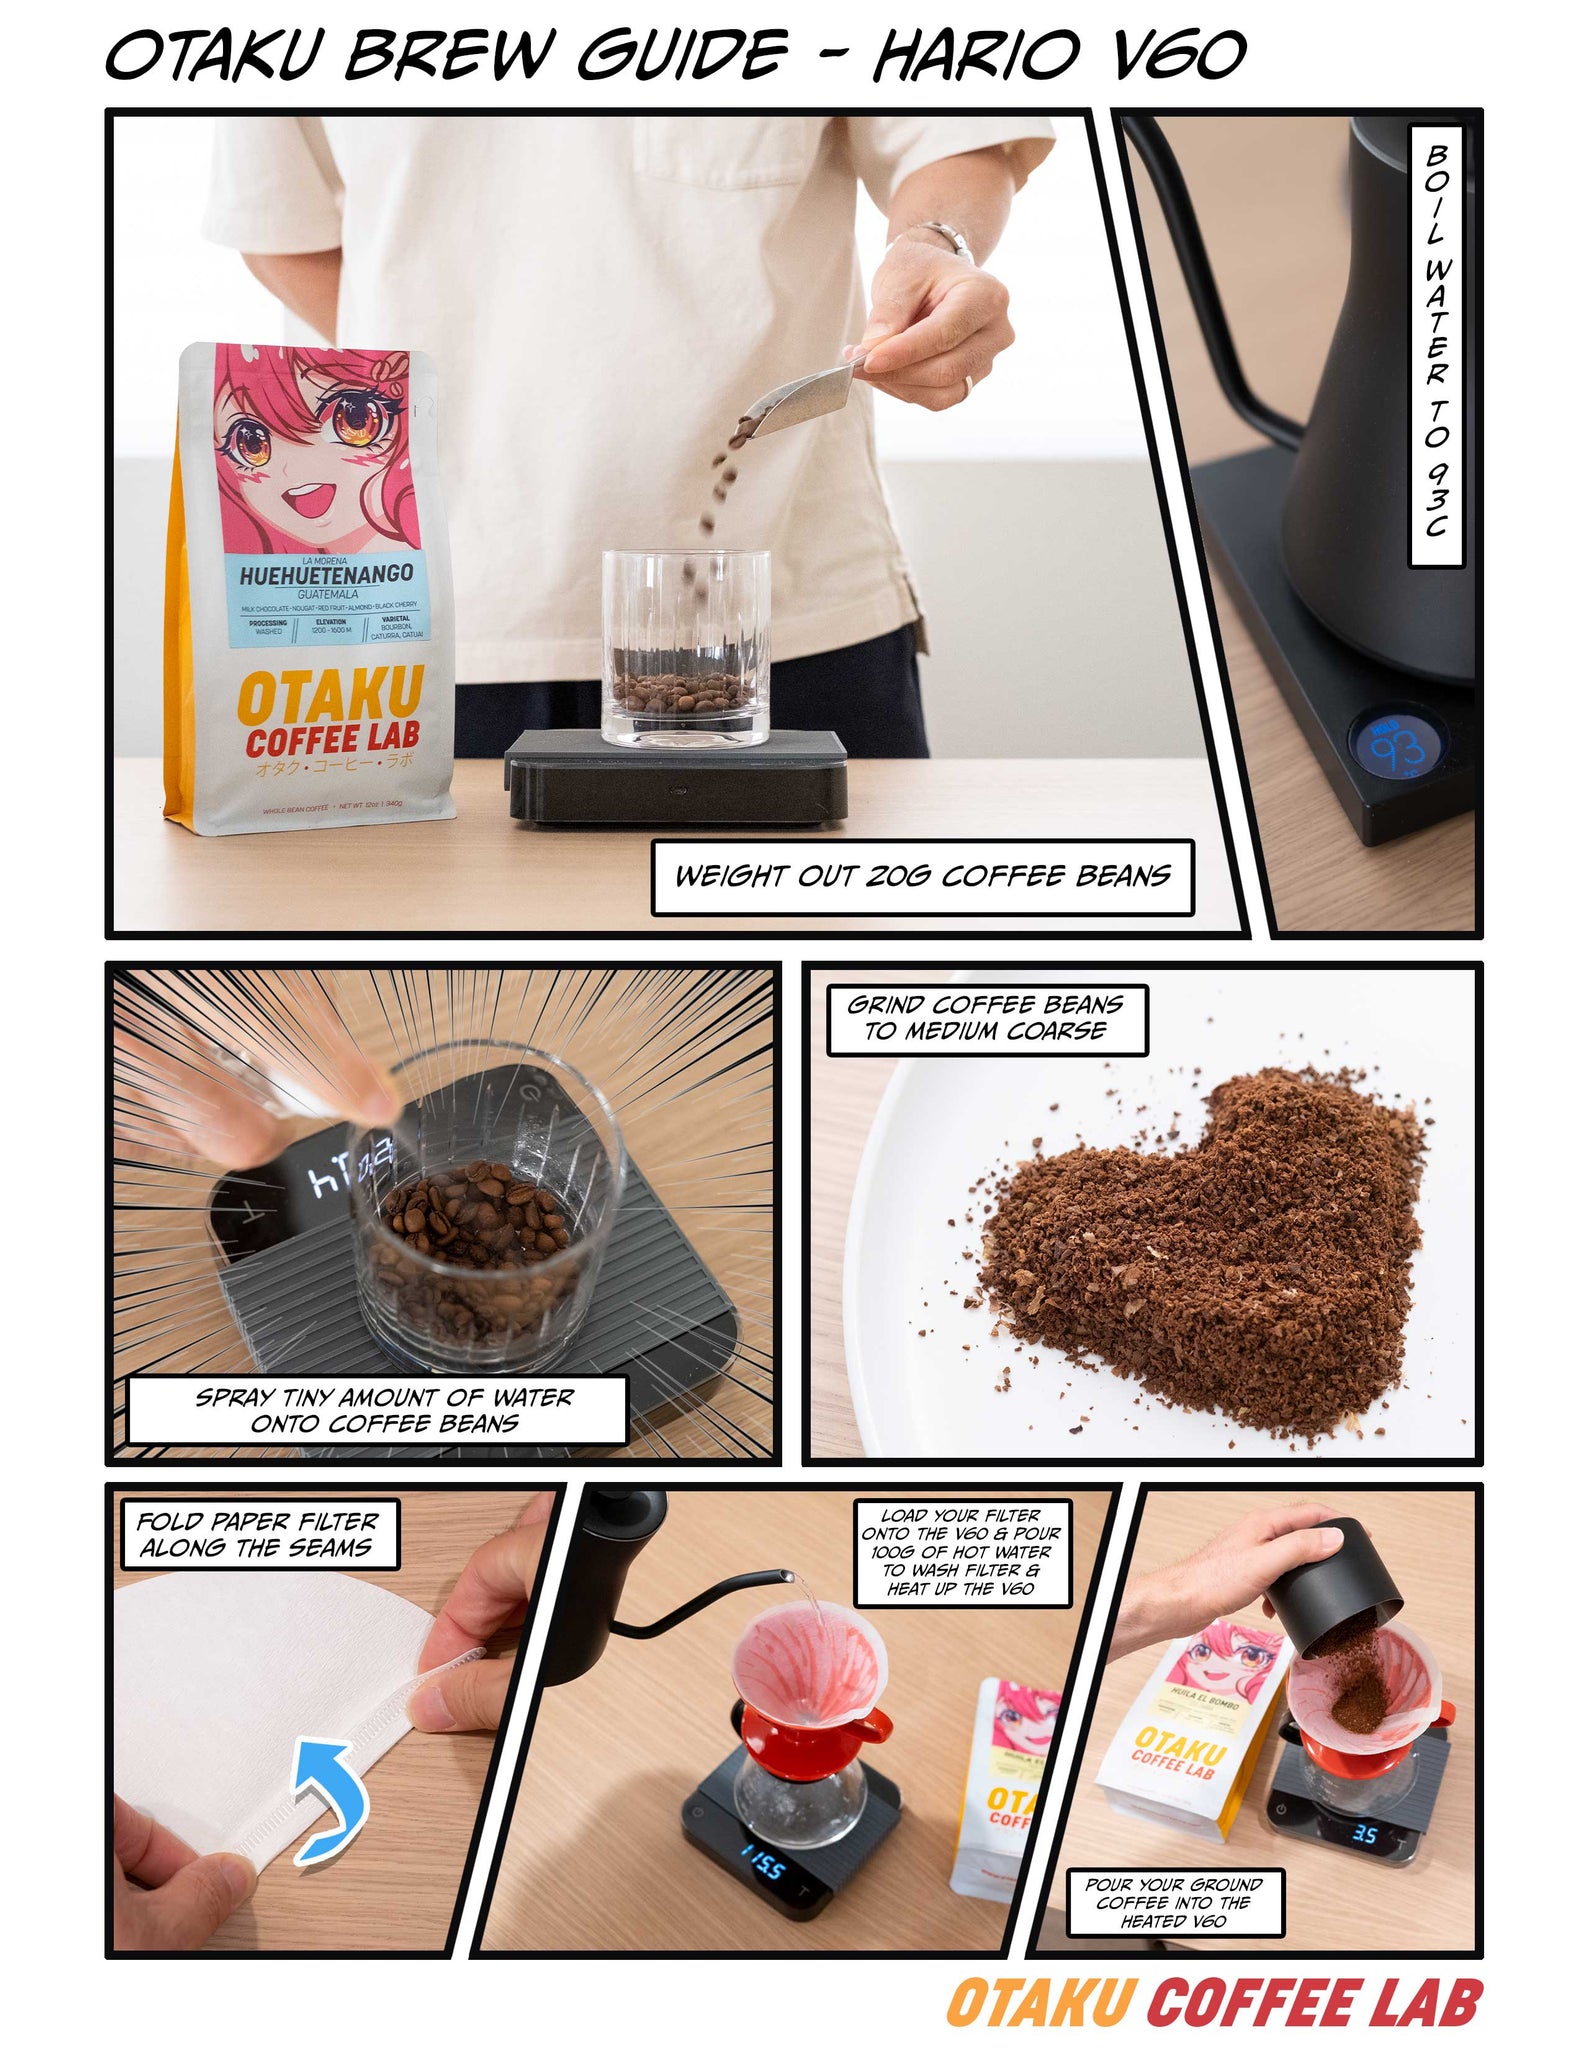 Page one of our manga comic depicting our Hario V60 Brewer specialty coffee brew guide